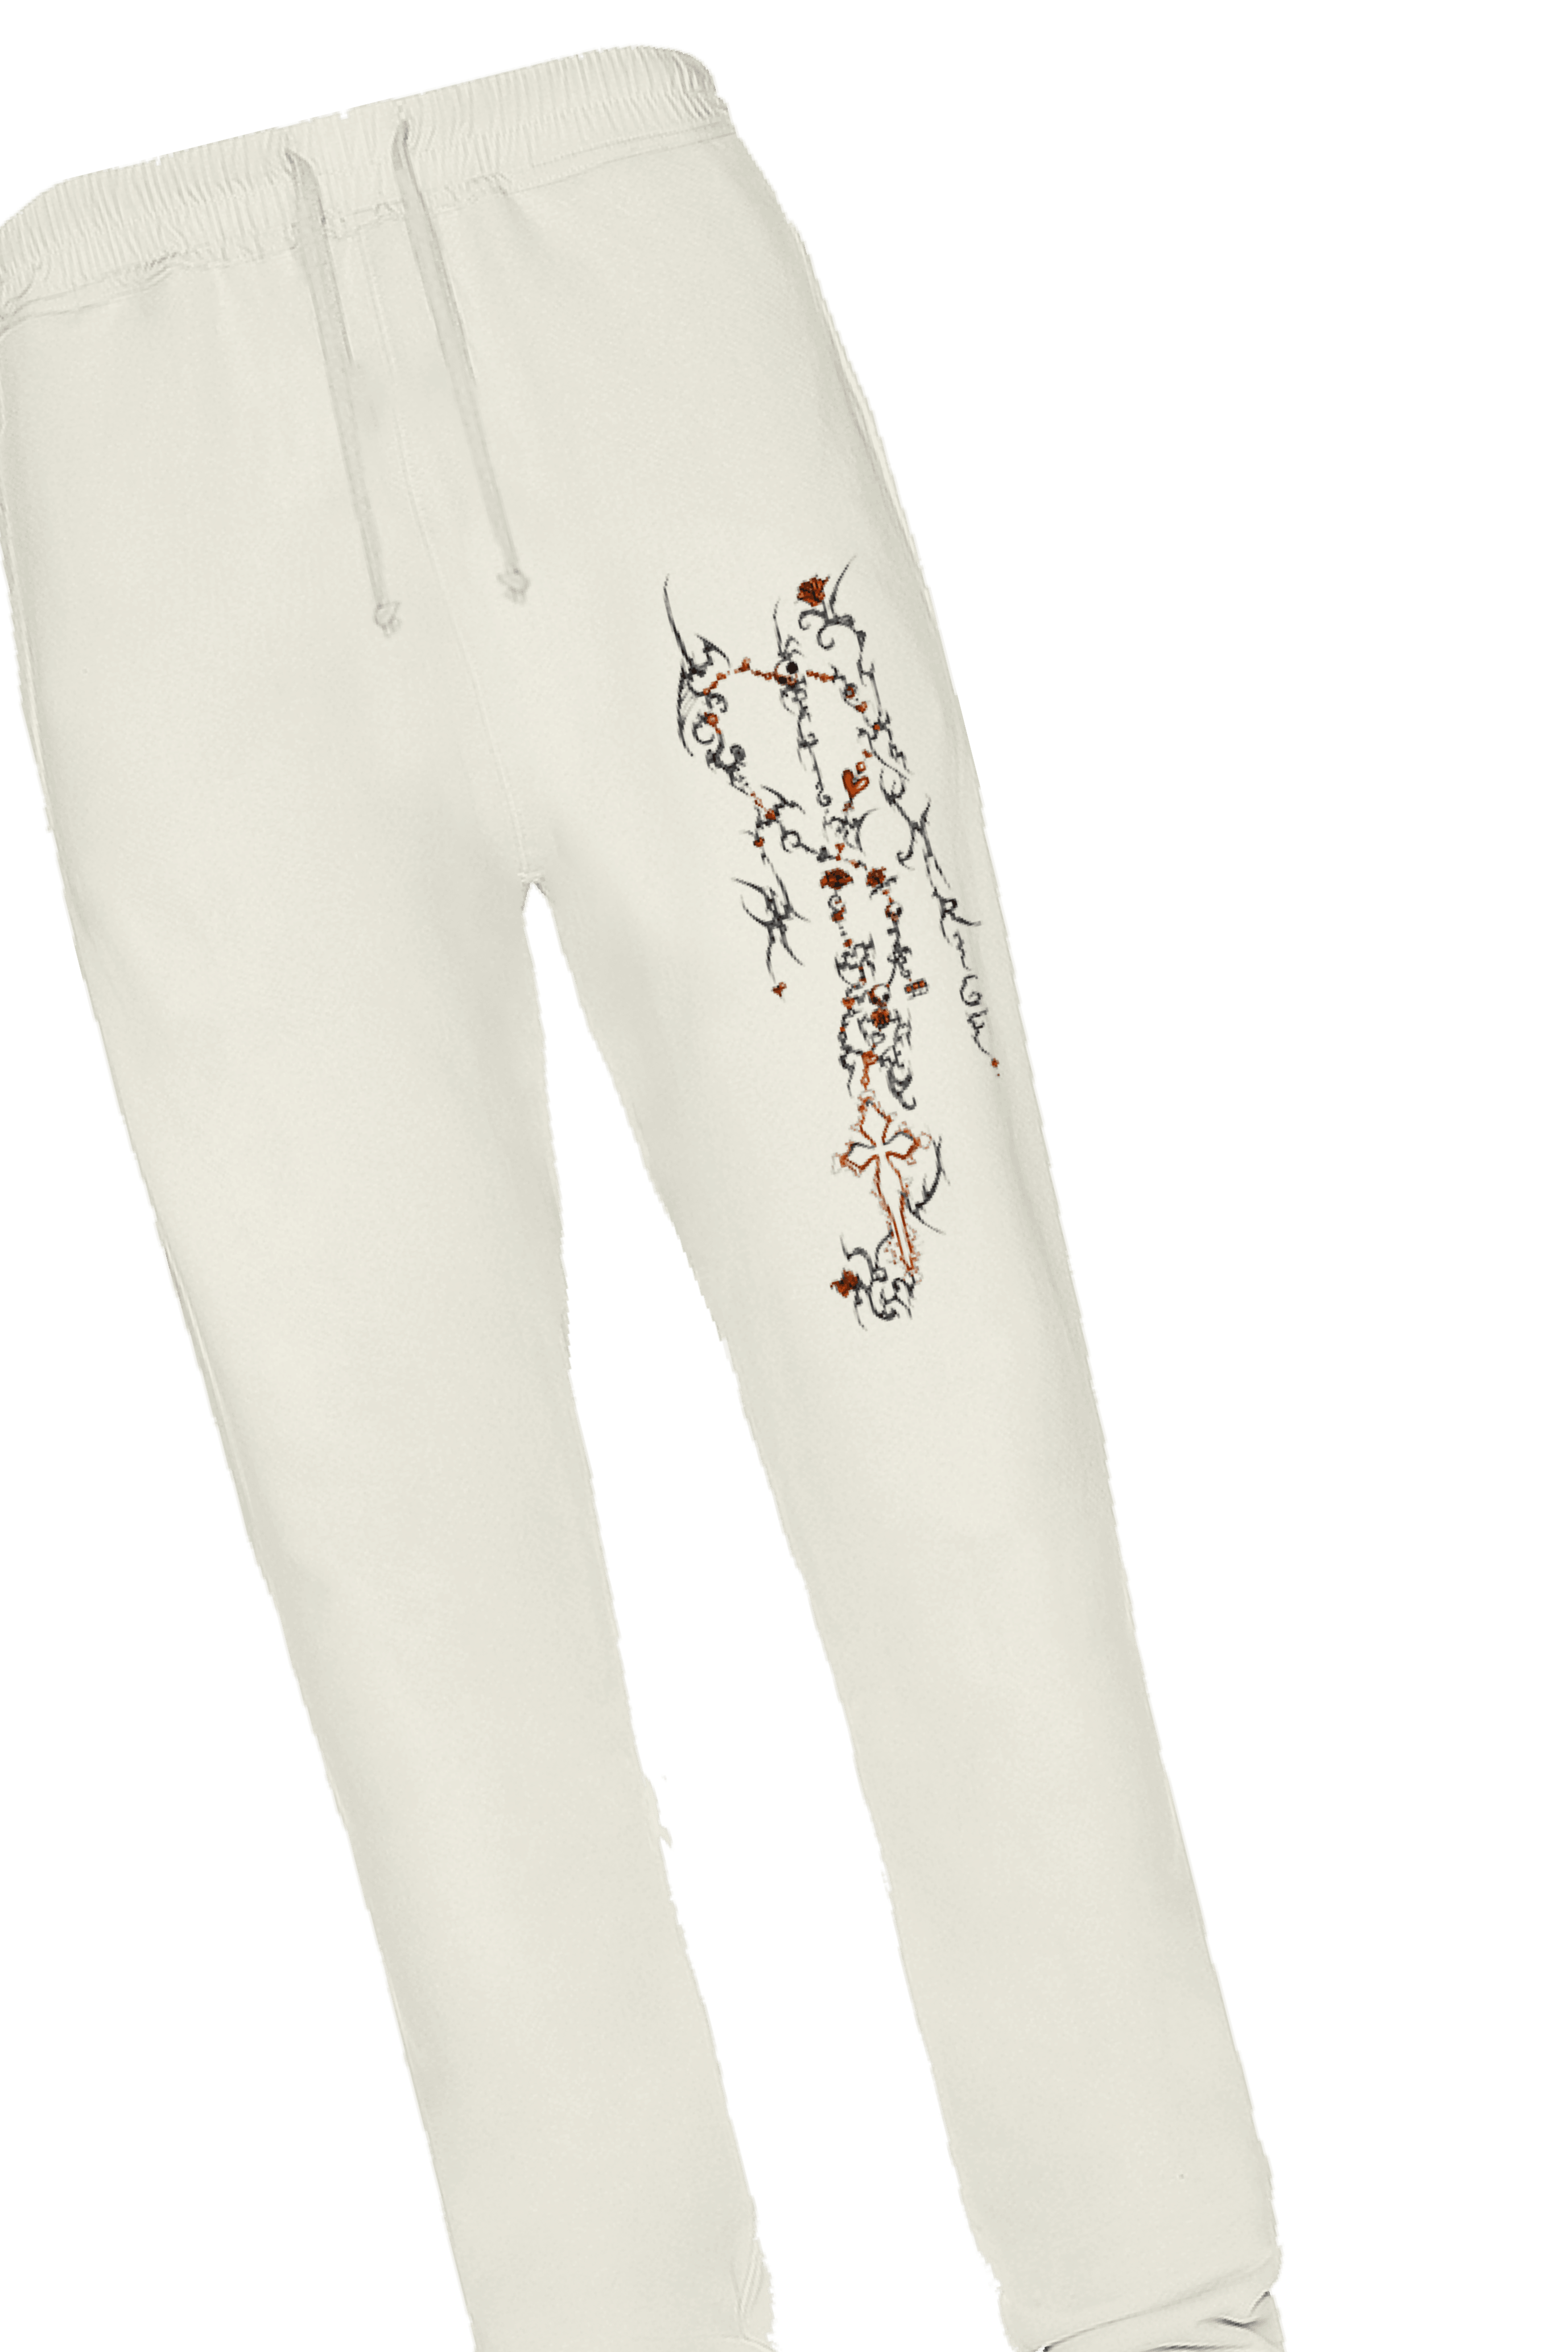 PATCH PANT - PATCH PANT - ROSE IN GOOD FAITH